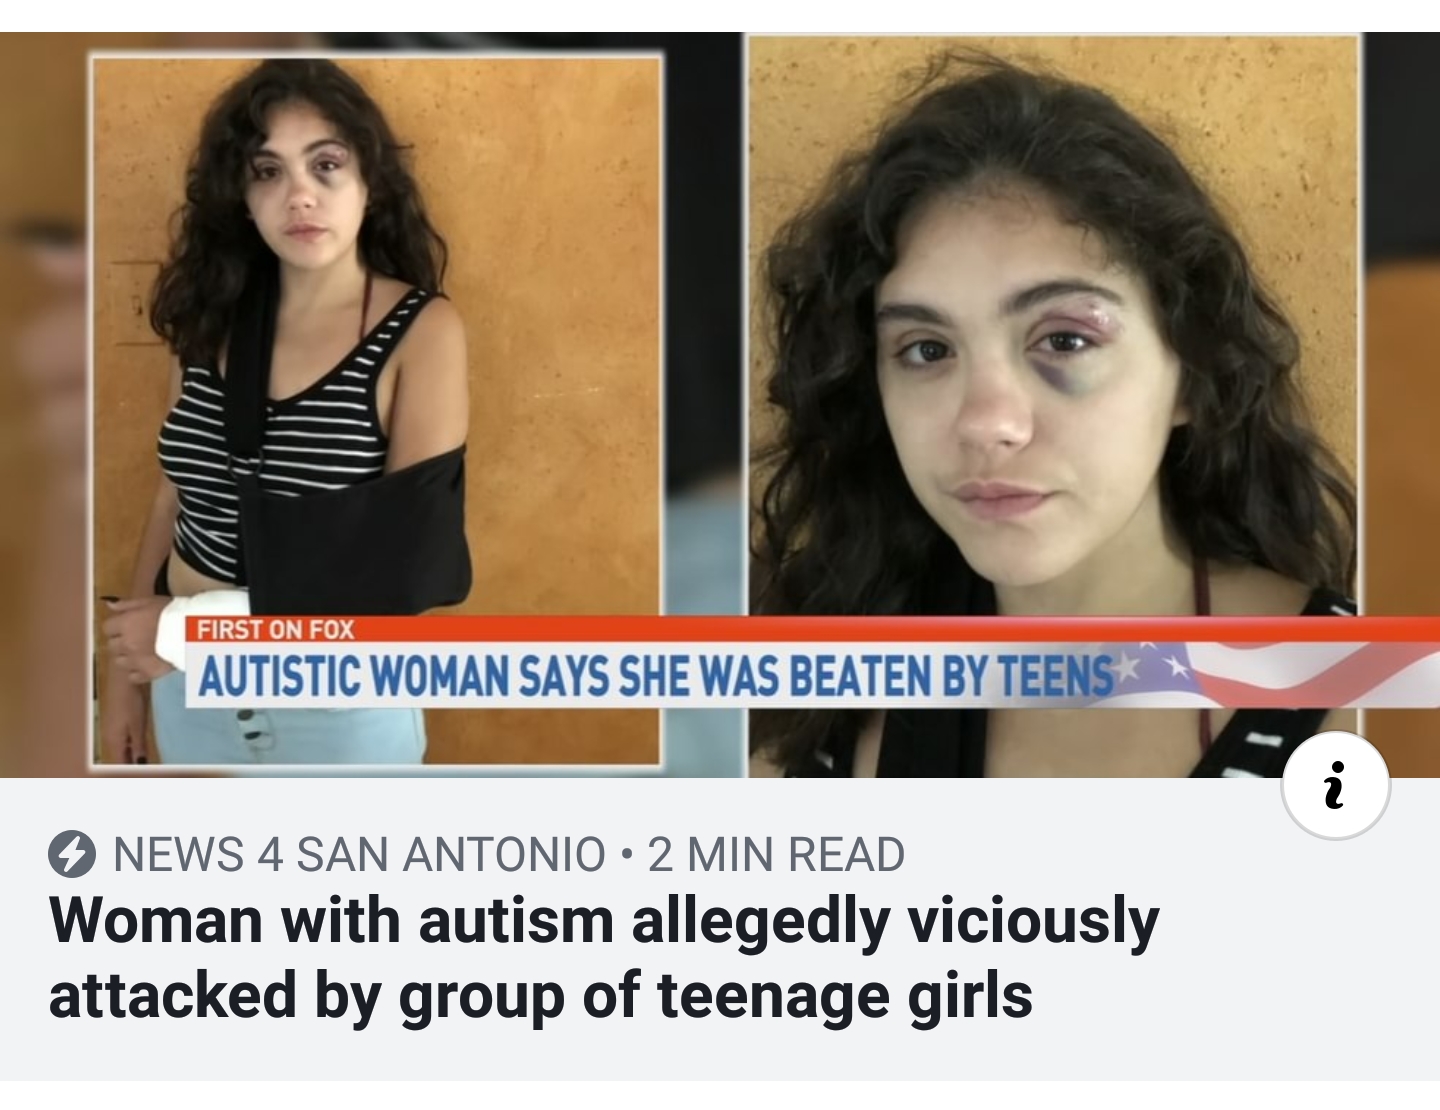 First On Fox Autistic Woman Says She Was Beaten By Teens News 4 San Antonio . 2 Min Read Woman with autism allegedly viciously attacked by group of teenage girls